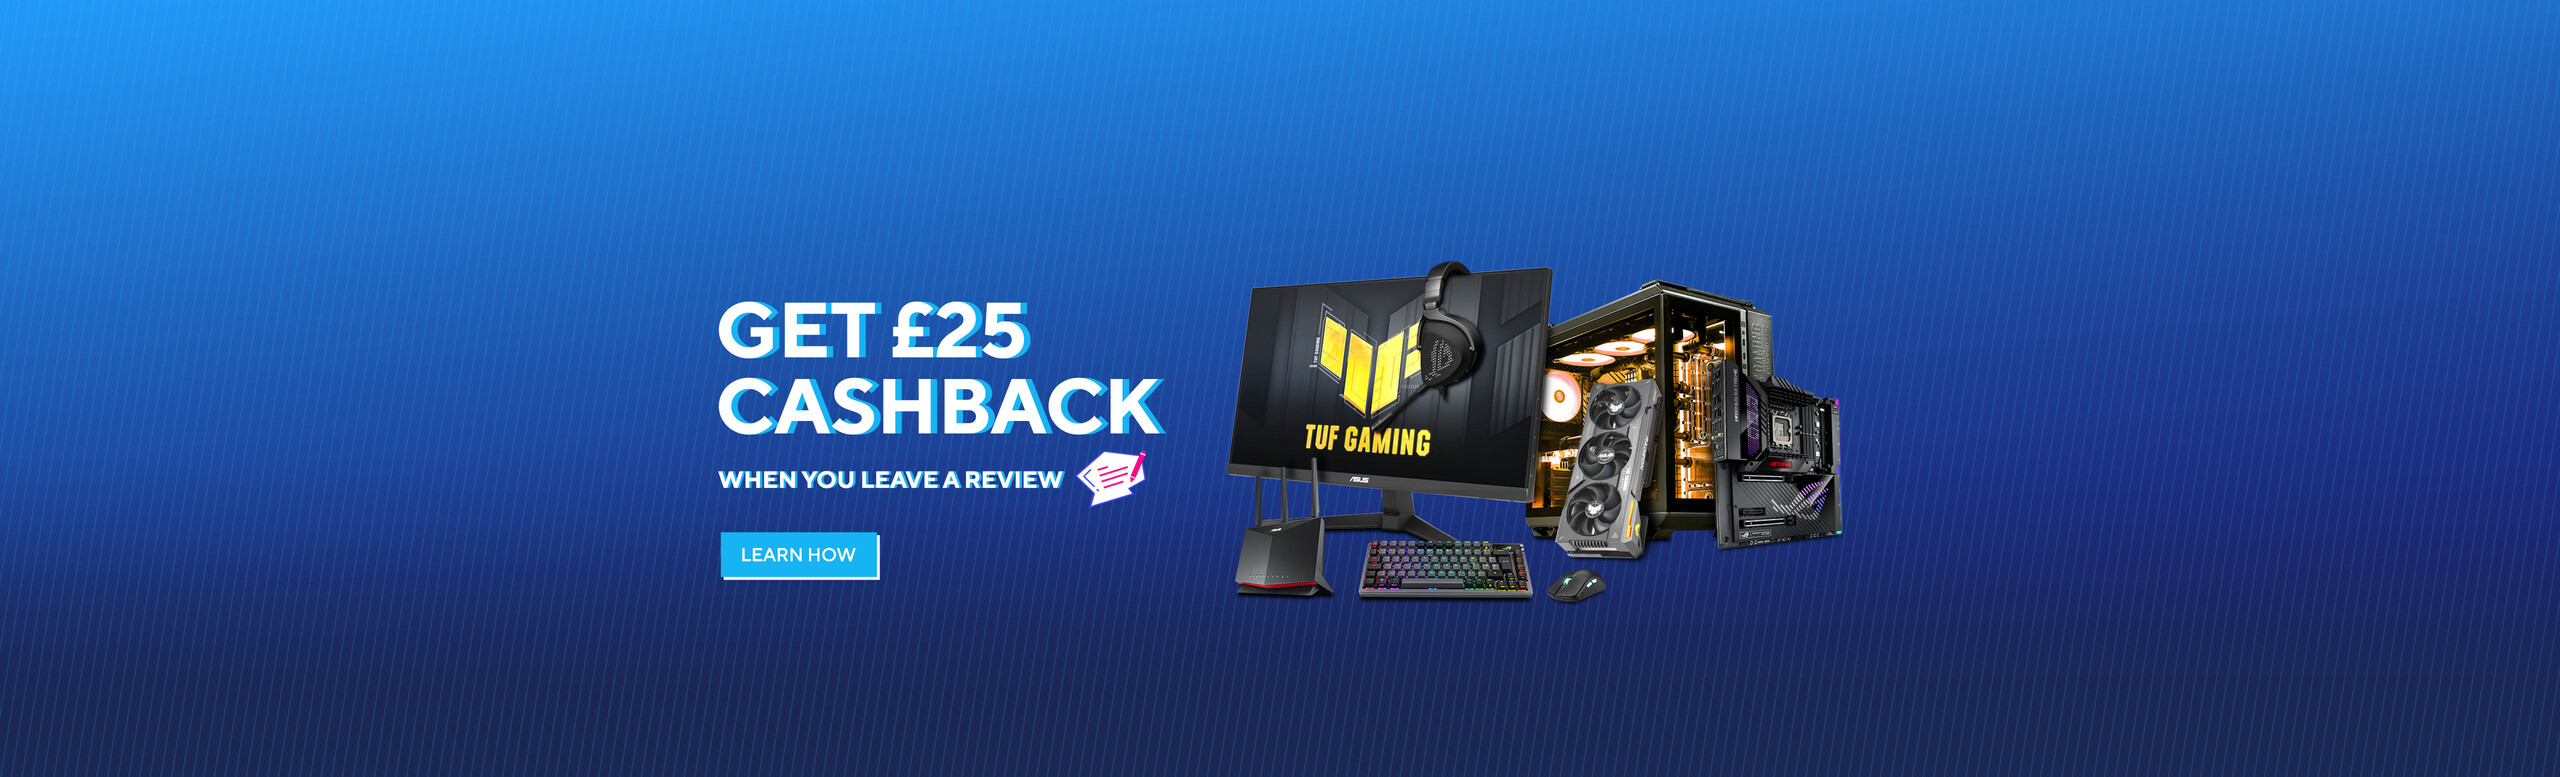 Get £25 cashback on selected Graphics Cards with Rate My Gear